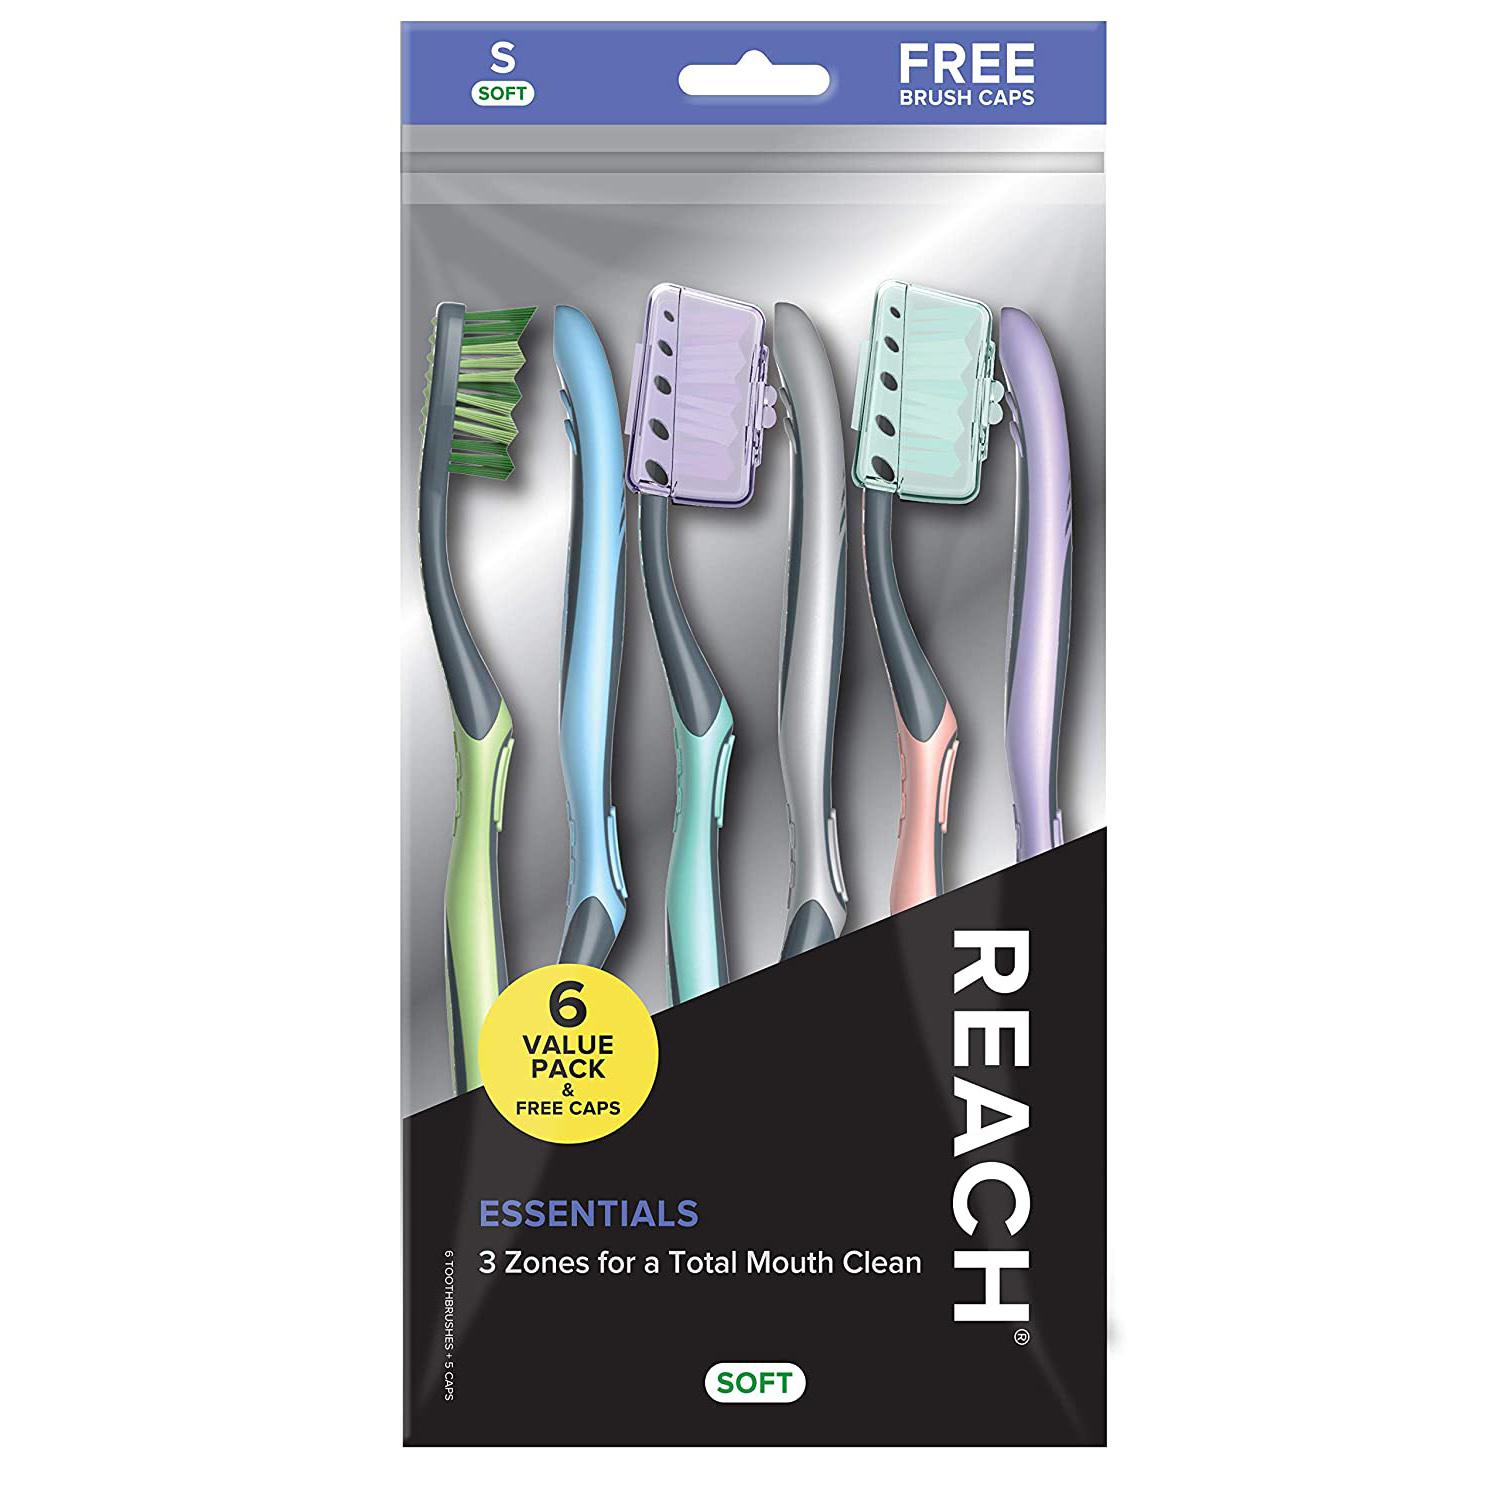 Reach Essentials Toothbrushes with Covers 6 Pack for $3.22 Shipped